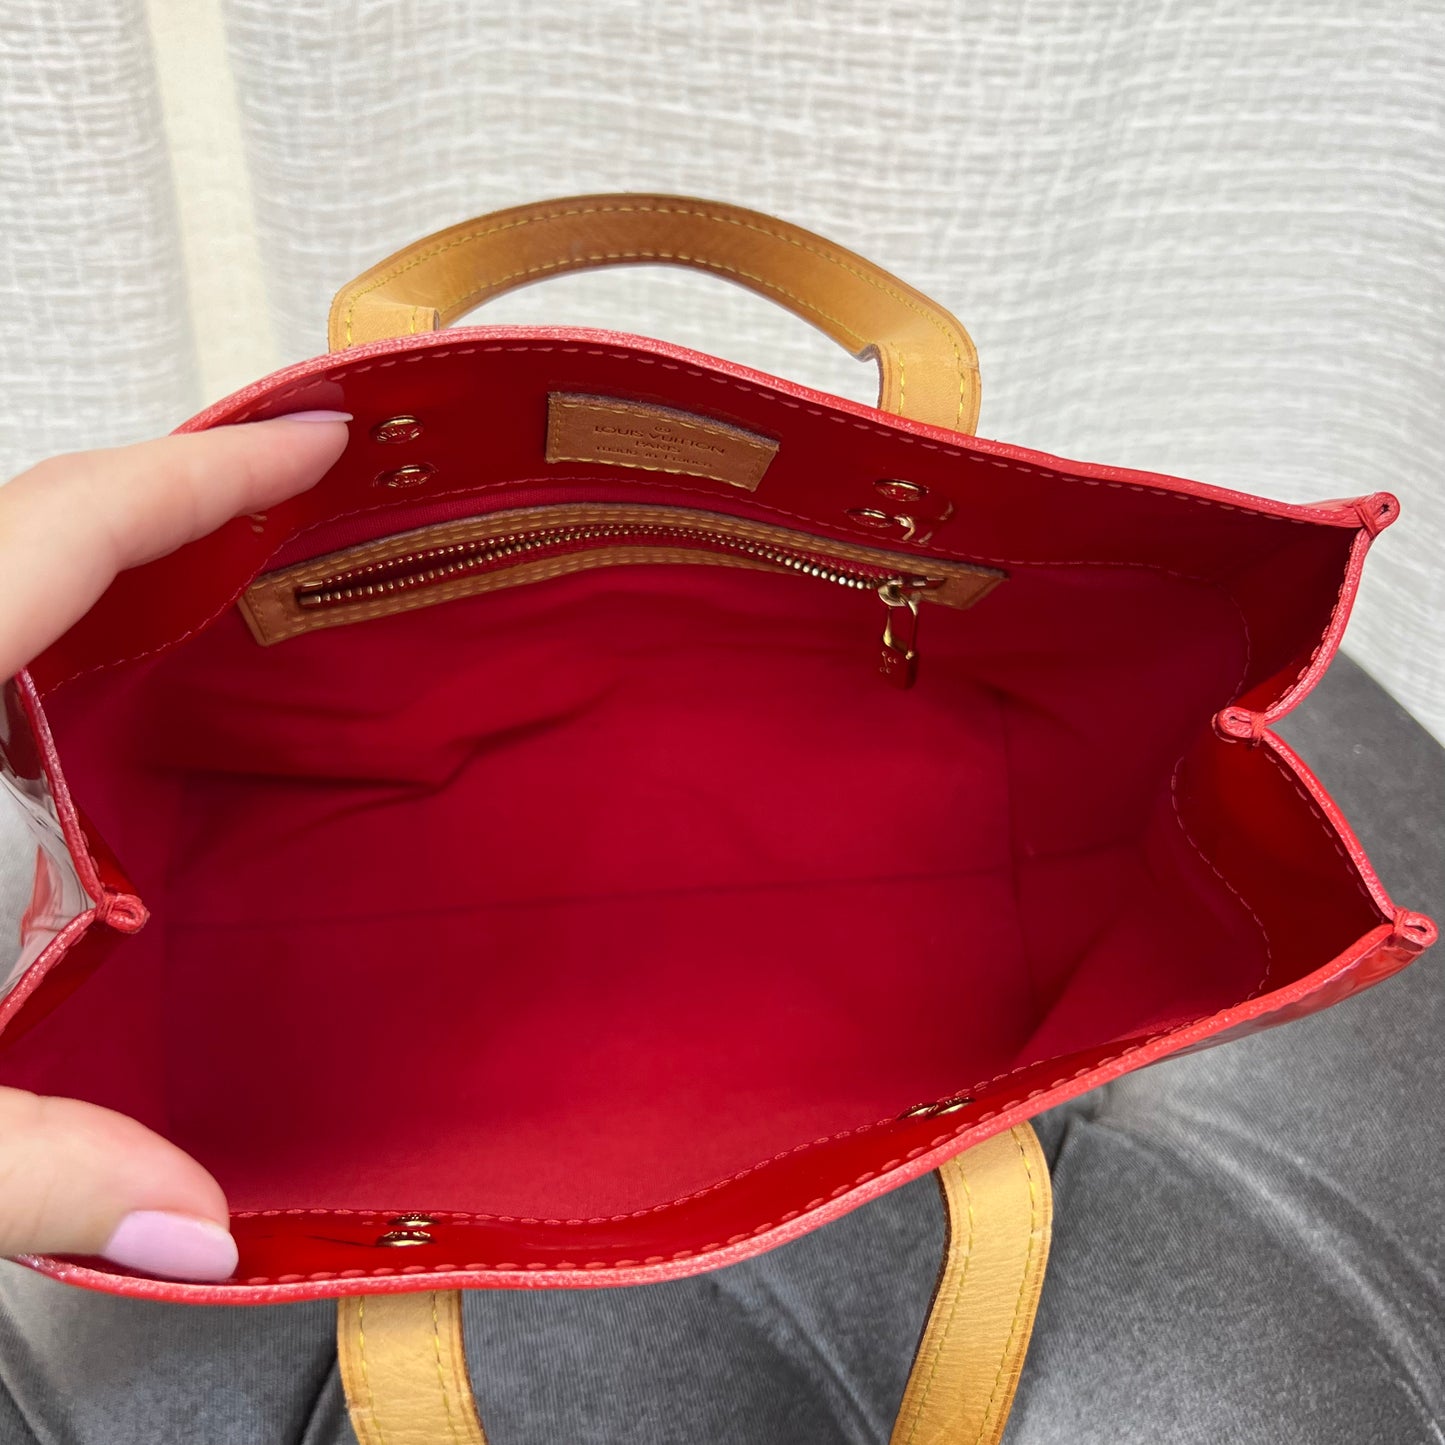 Louis Vuitton Vernis Rogue Small Tote